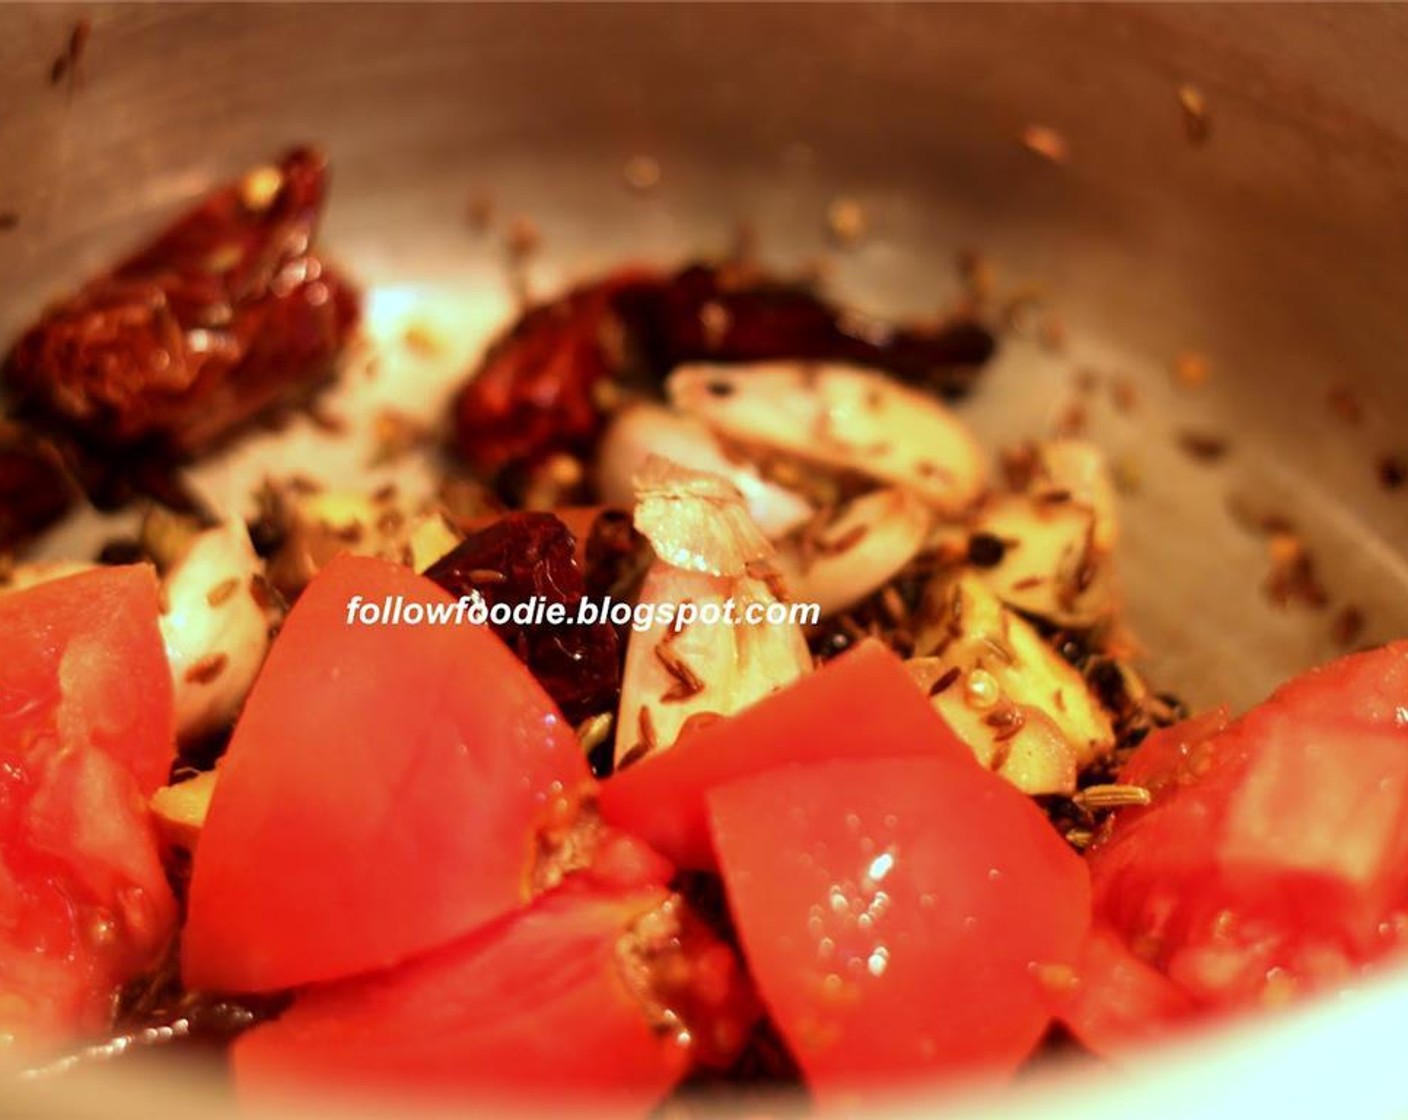 step 4 In a pressure cooker, add Oil (2 Tbsp) Fry the Red Chili Peppers (15), Cumin Seeds (1 Tbsp), Peppercorns (1/2 Tbsp), Fennel Seeds (1 tsp), ginger, chopped tomatoes and Garlic (8 cloves). Cook until the tomatoes are mushy.